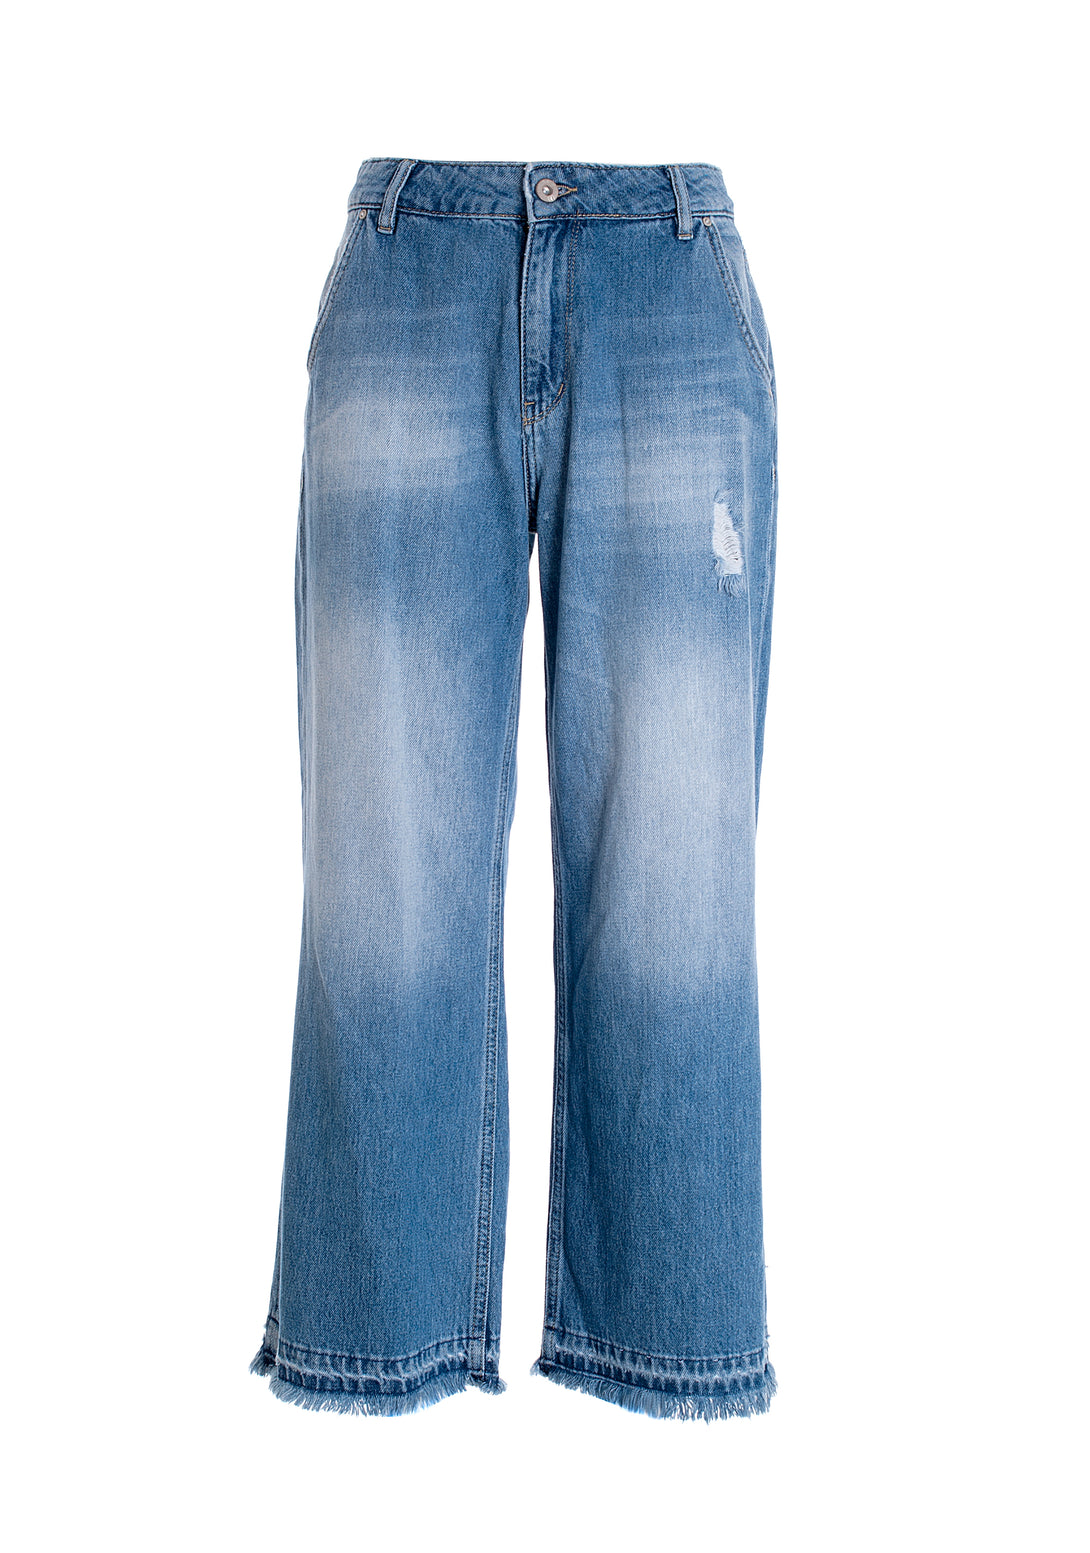 Culotte pant cropped made in denim with middle wash